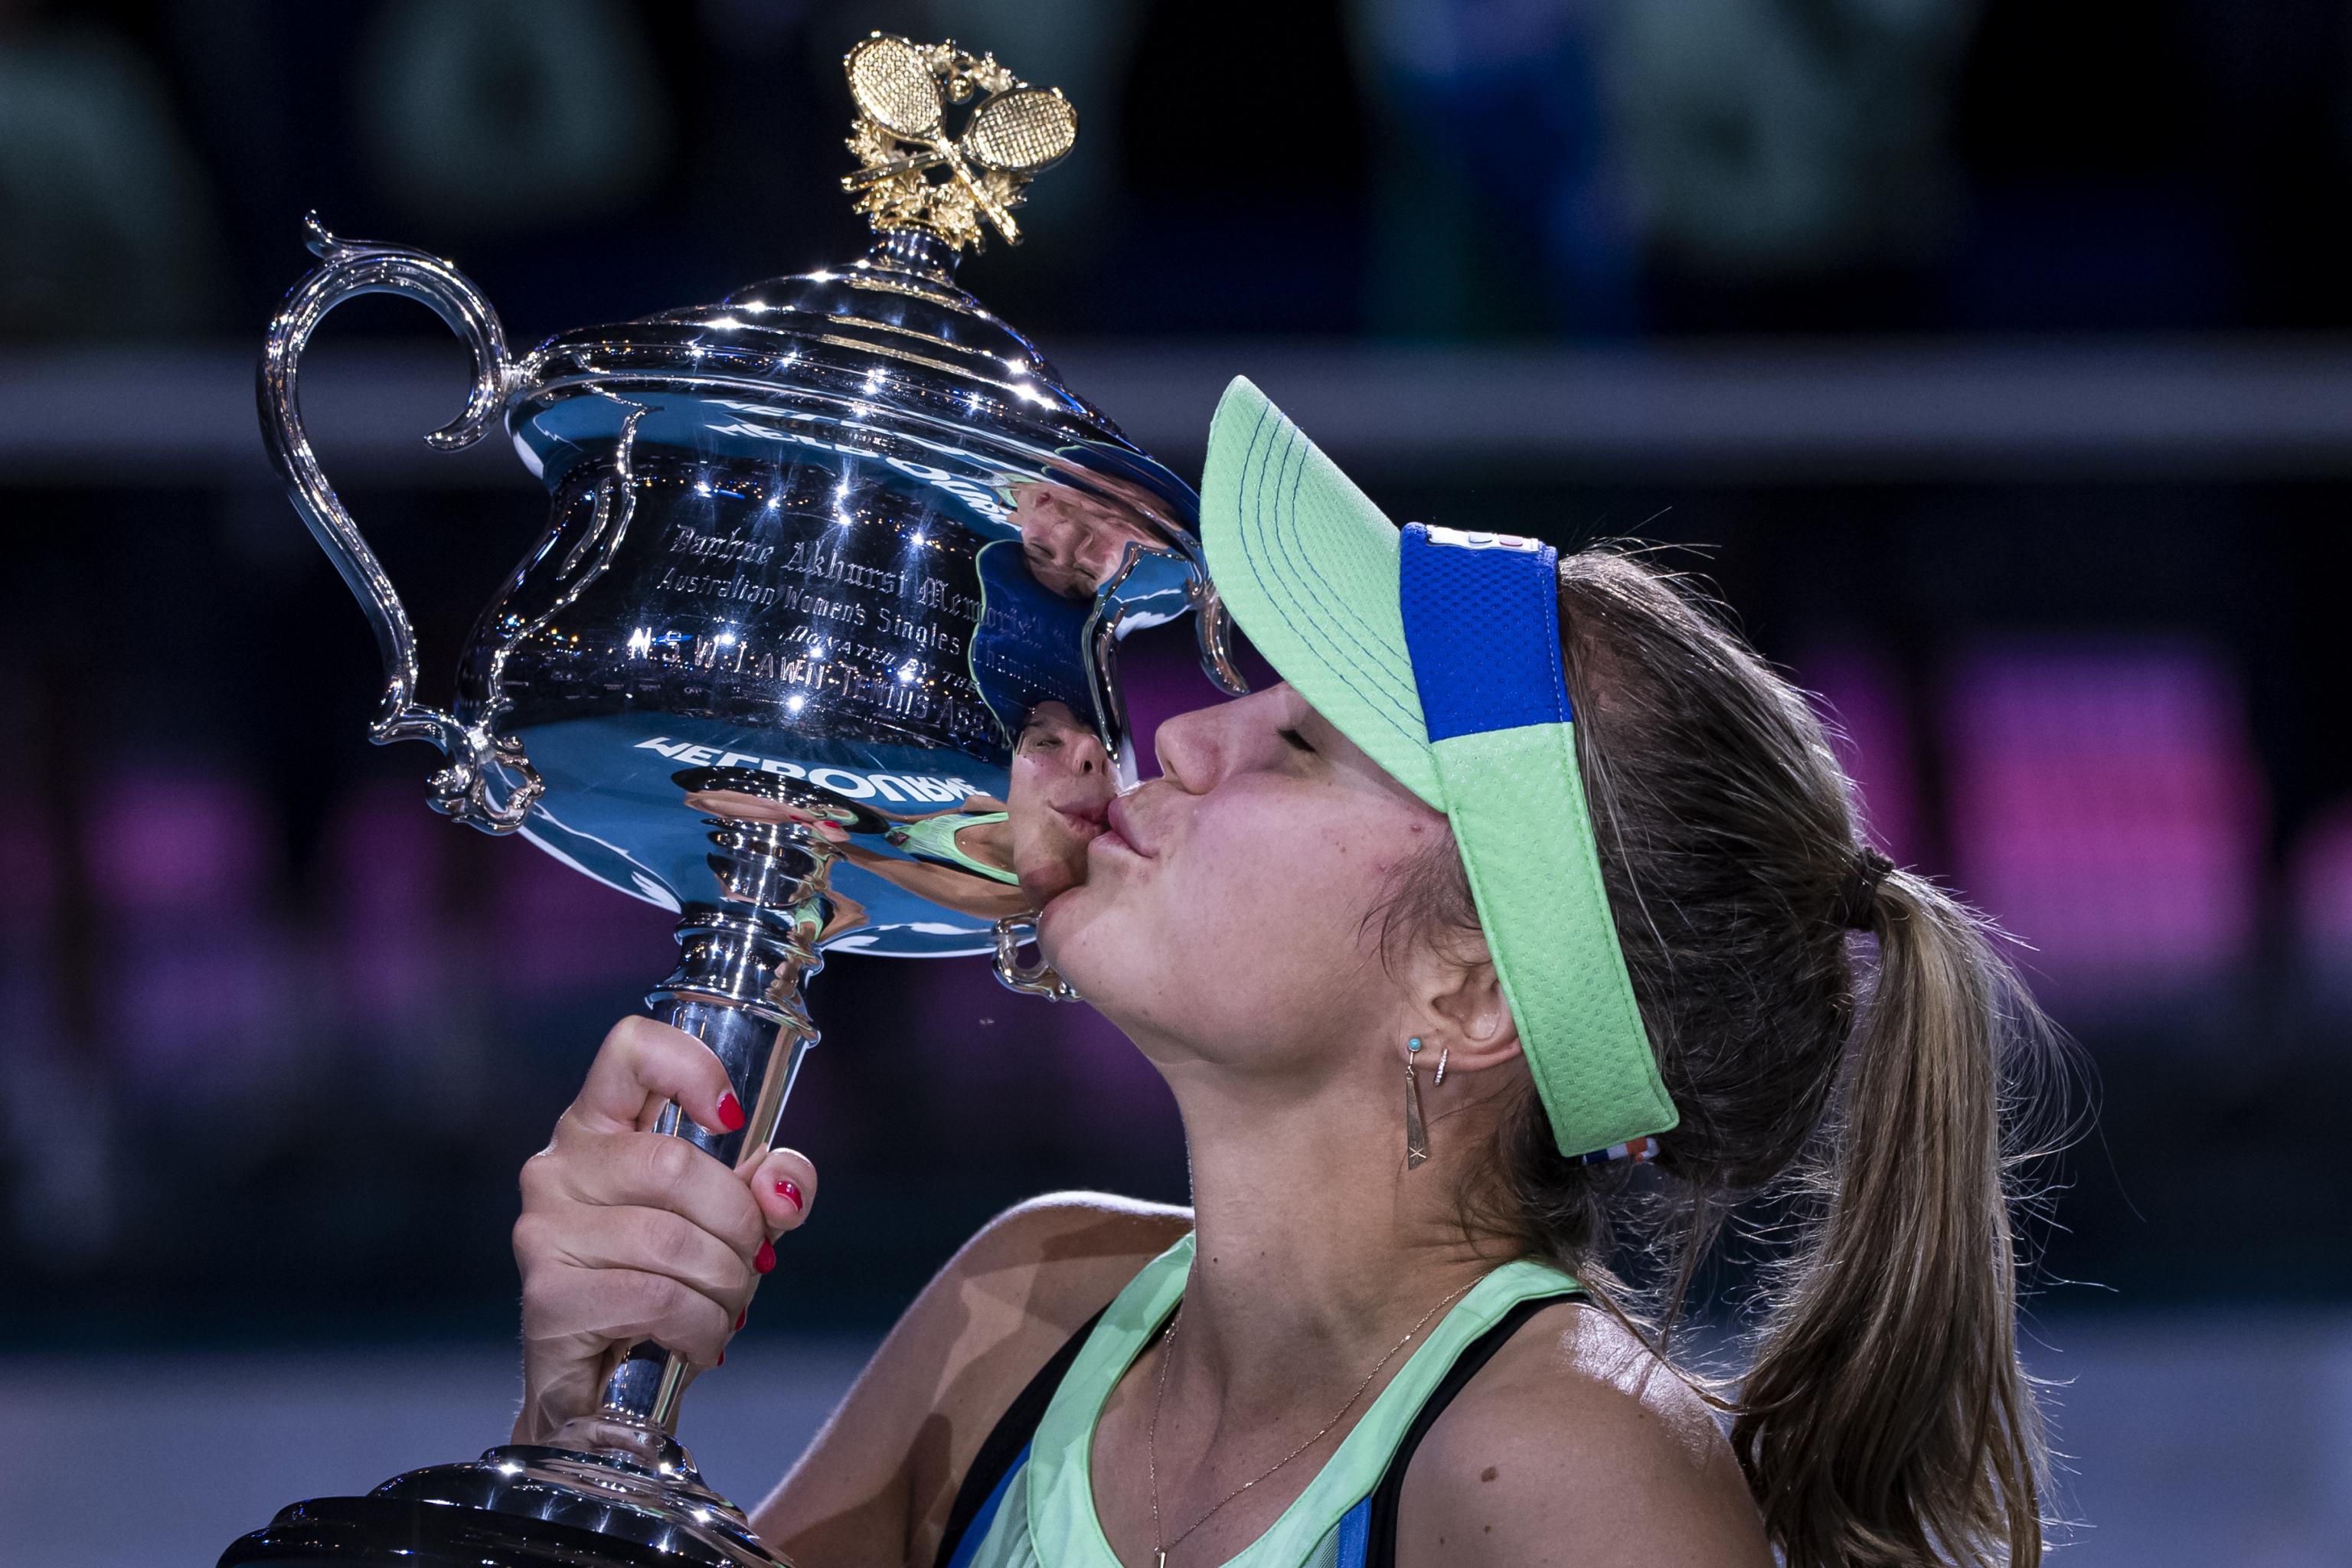 Australian Open 2020 Results: Final Look at Women's Bracket and Prize Money | Bleacher Report | Latest News, and Highlights